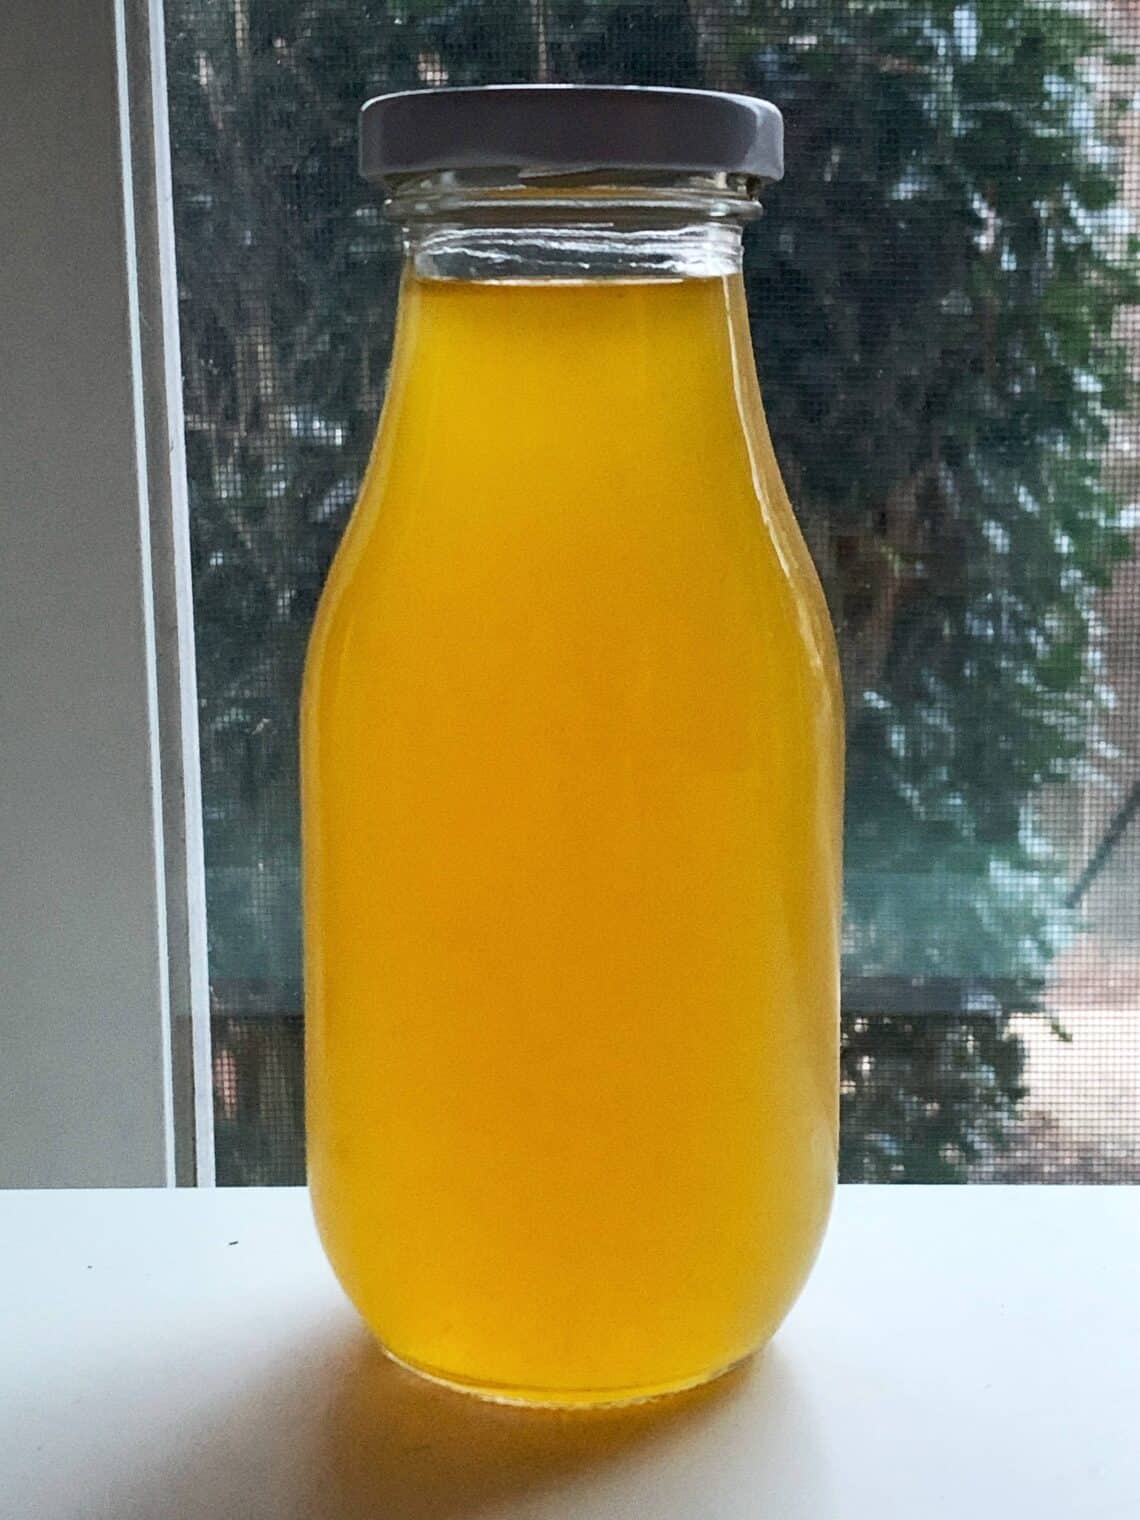 Homemade mandarin orange simple syrup recipe made in a glass bottle